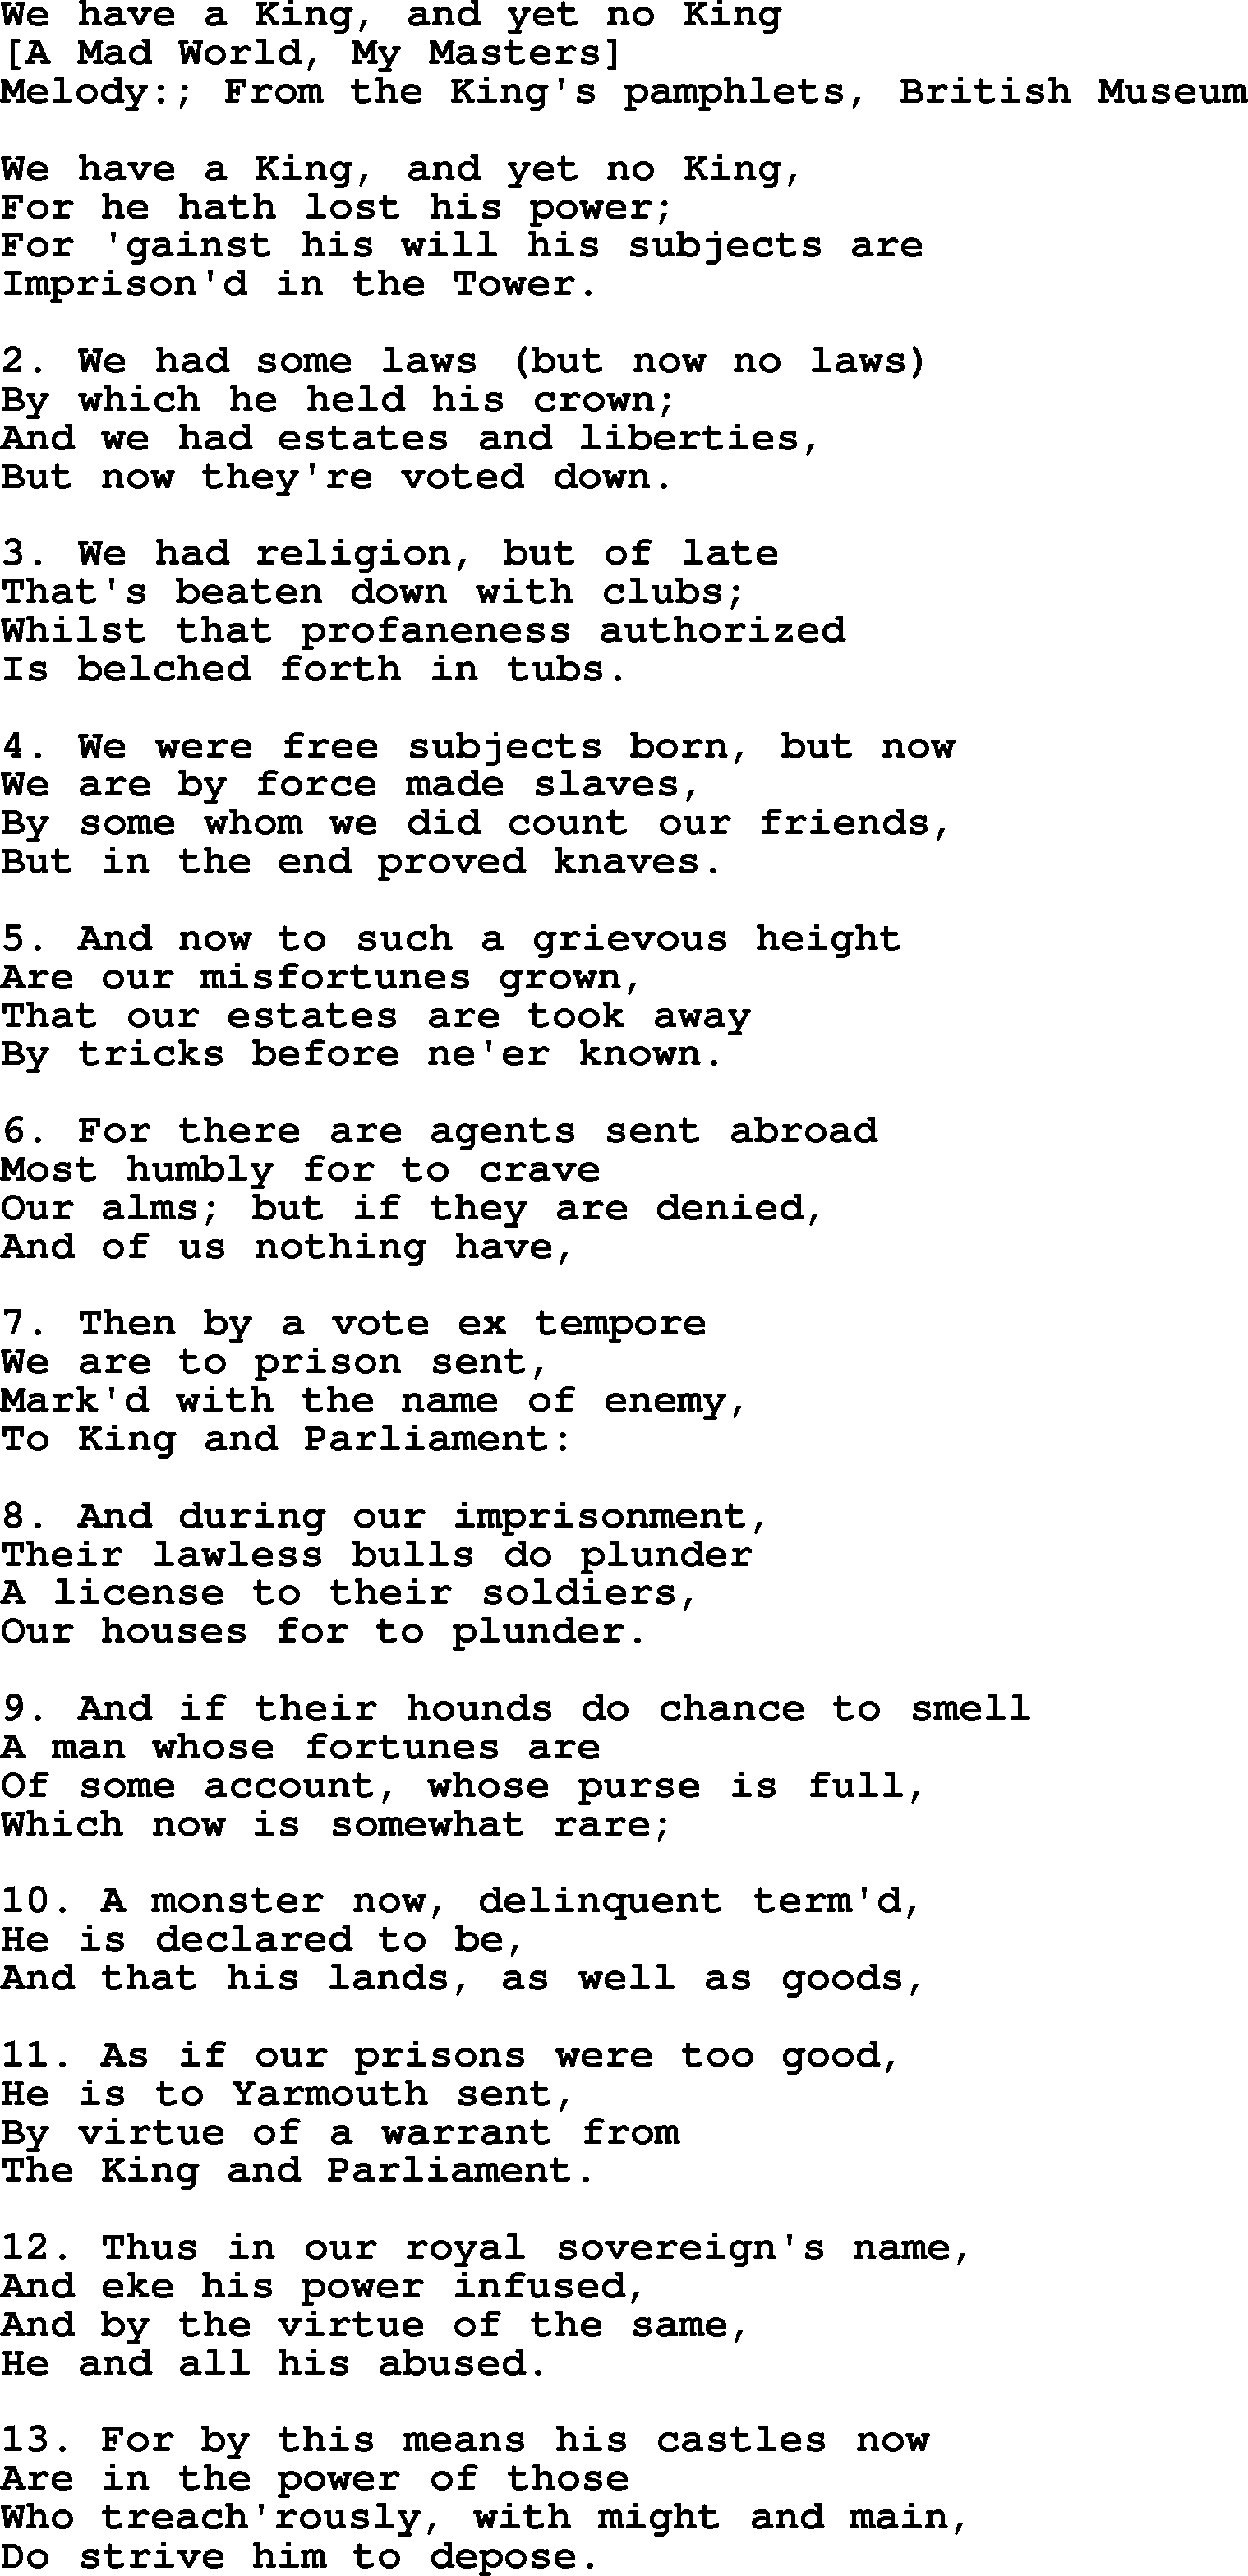 Old English Song: We Have A King, And Yet No King lyrics